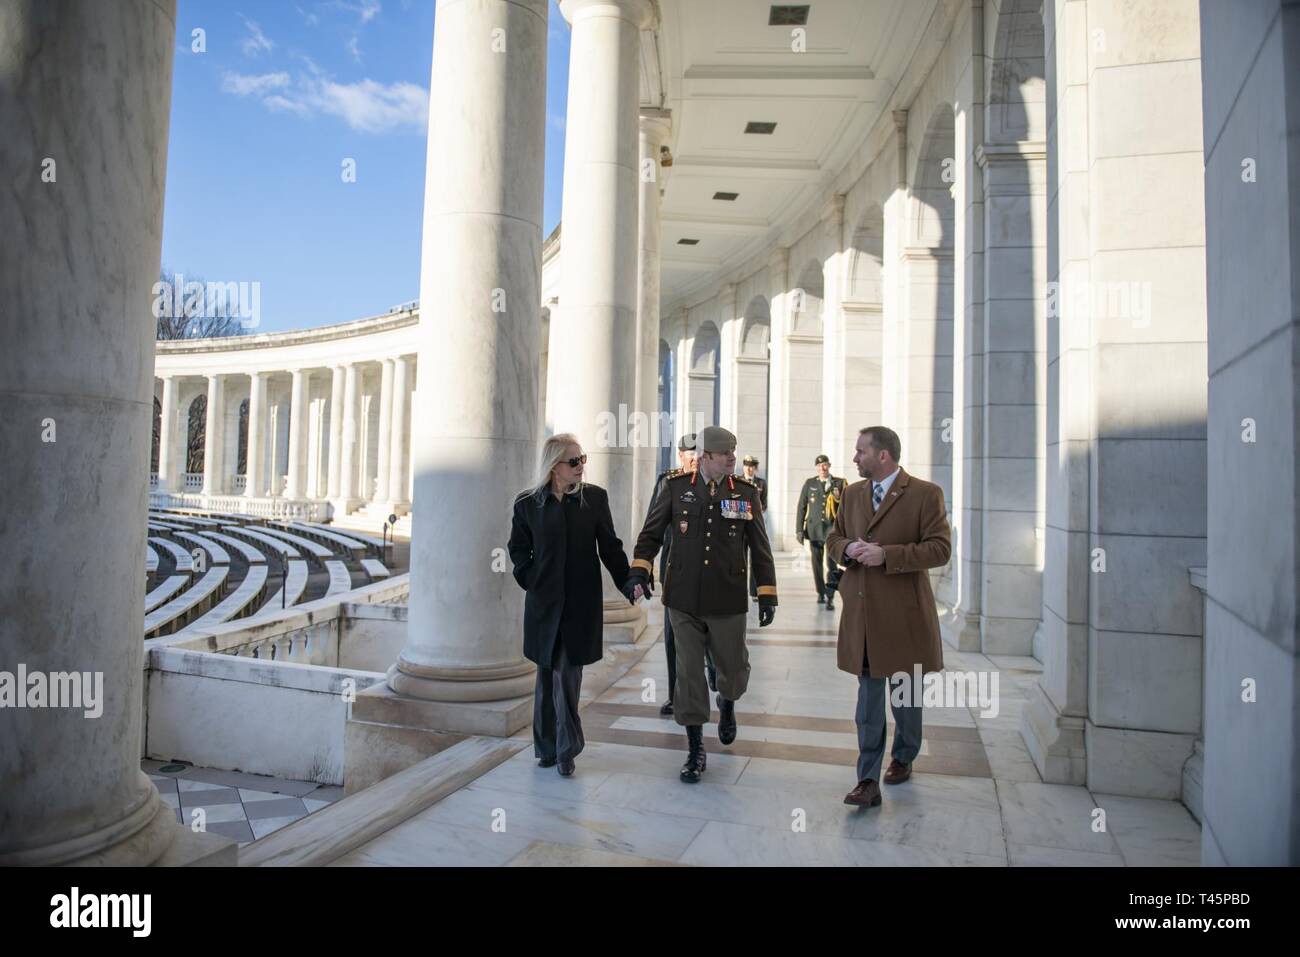 Lt. Gen. M.N. (Mike) Rouleau (center), commander, Canadian Joint Operations Command;  his partner, Andrea Themely (left); and Michael Migliara (right), director of operations, Arlington National Cemetery; walk through the Memorial Amphitheater at Arlington National Cemetery, Arlington, Virginia, March 6, 2019. Rouleau participated in an Armed Forces Full Honors Wreath-Laying Ceremony at the Tomb of the Unknown Soldier and toured the Memorial Amphitheater Display Room as part of his visit. Stock Photo